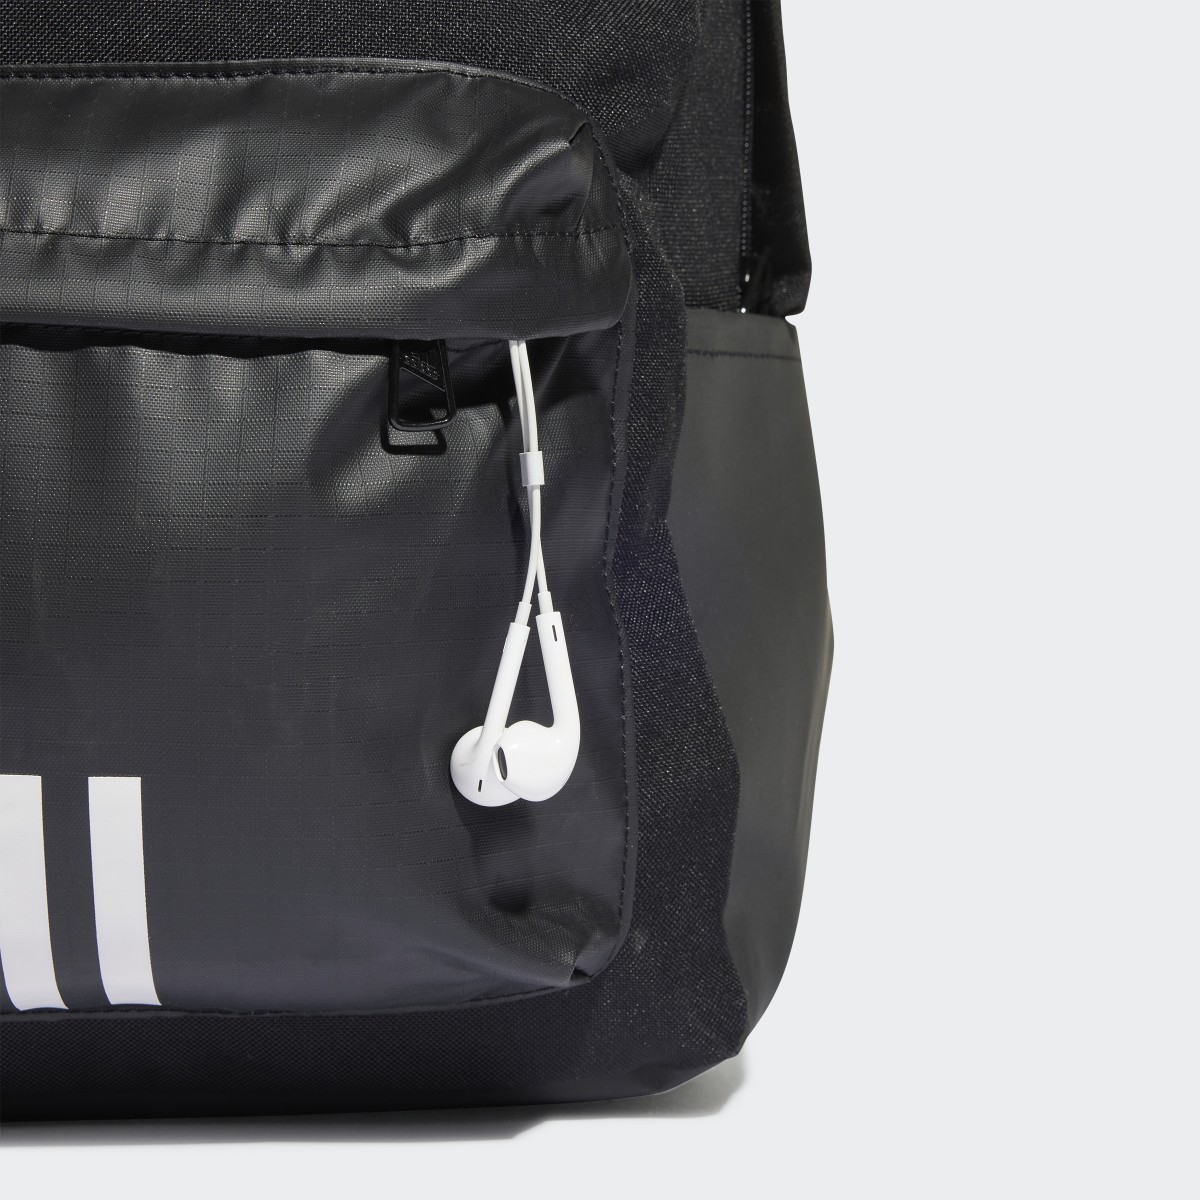 Adidas Classic Badge of Sport 3-Stripes Backpack. 7